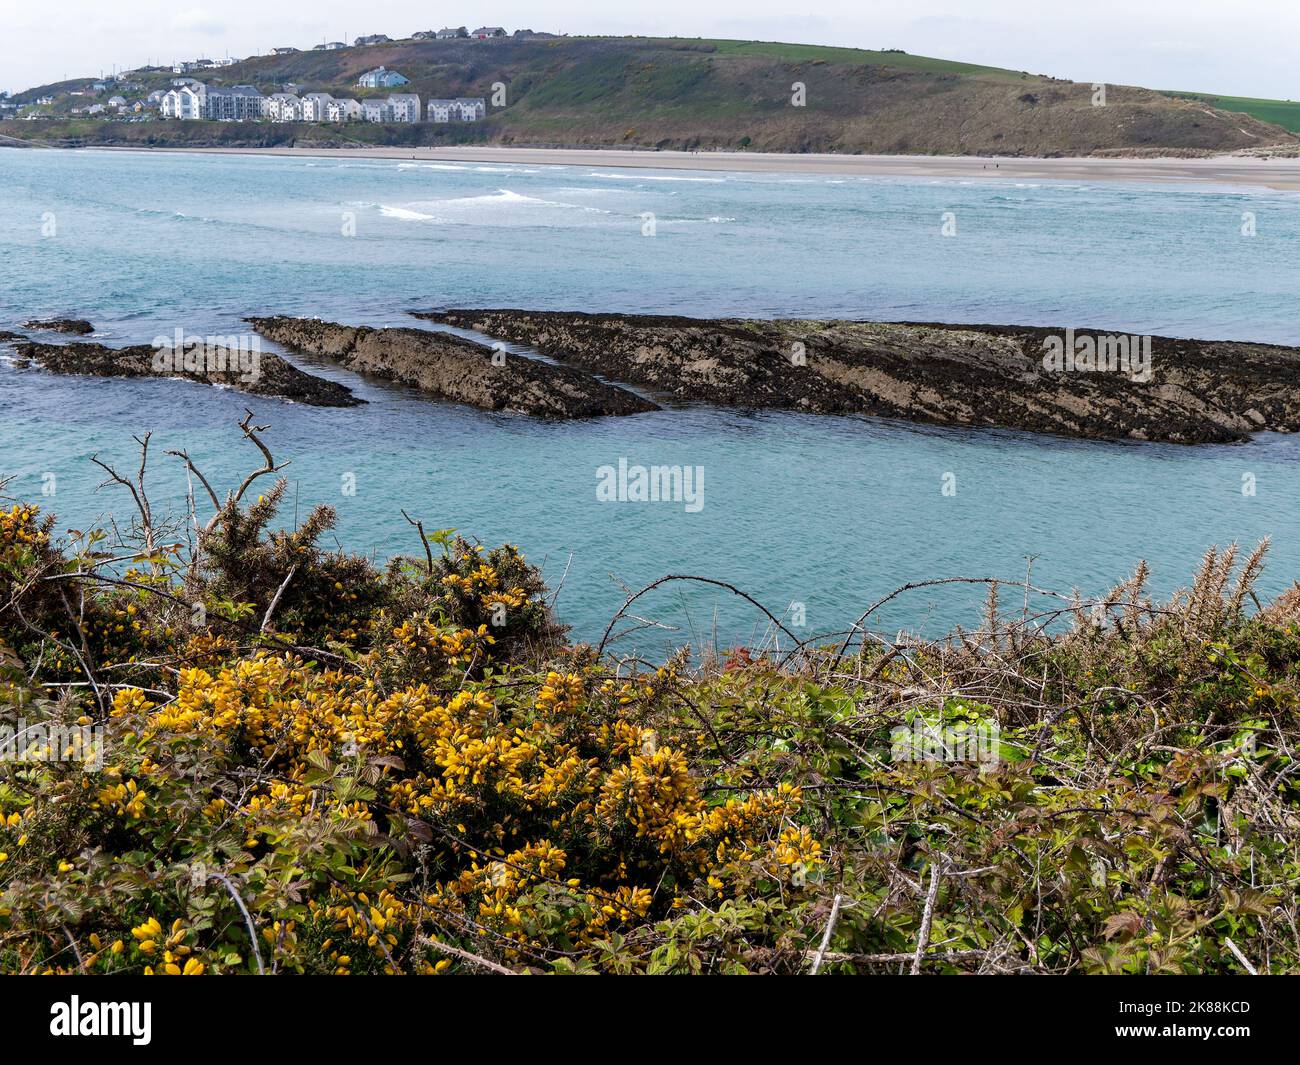 Dense coastal bushes. View of Clonakilty Bay. Sea rocks. A picturesque place in Europe, rock formation near body of water. The nature of Ireland. Stock Photo